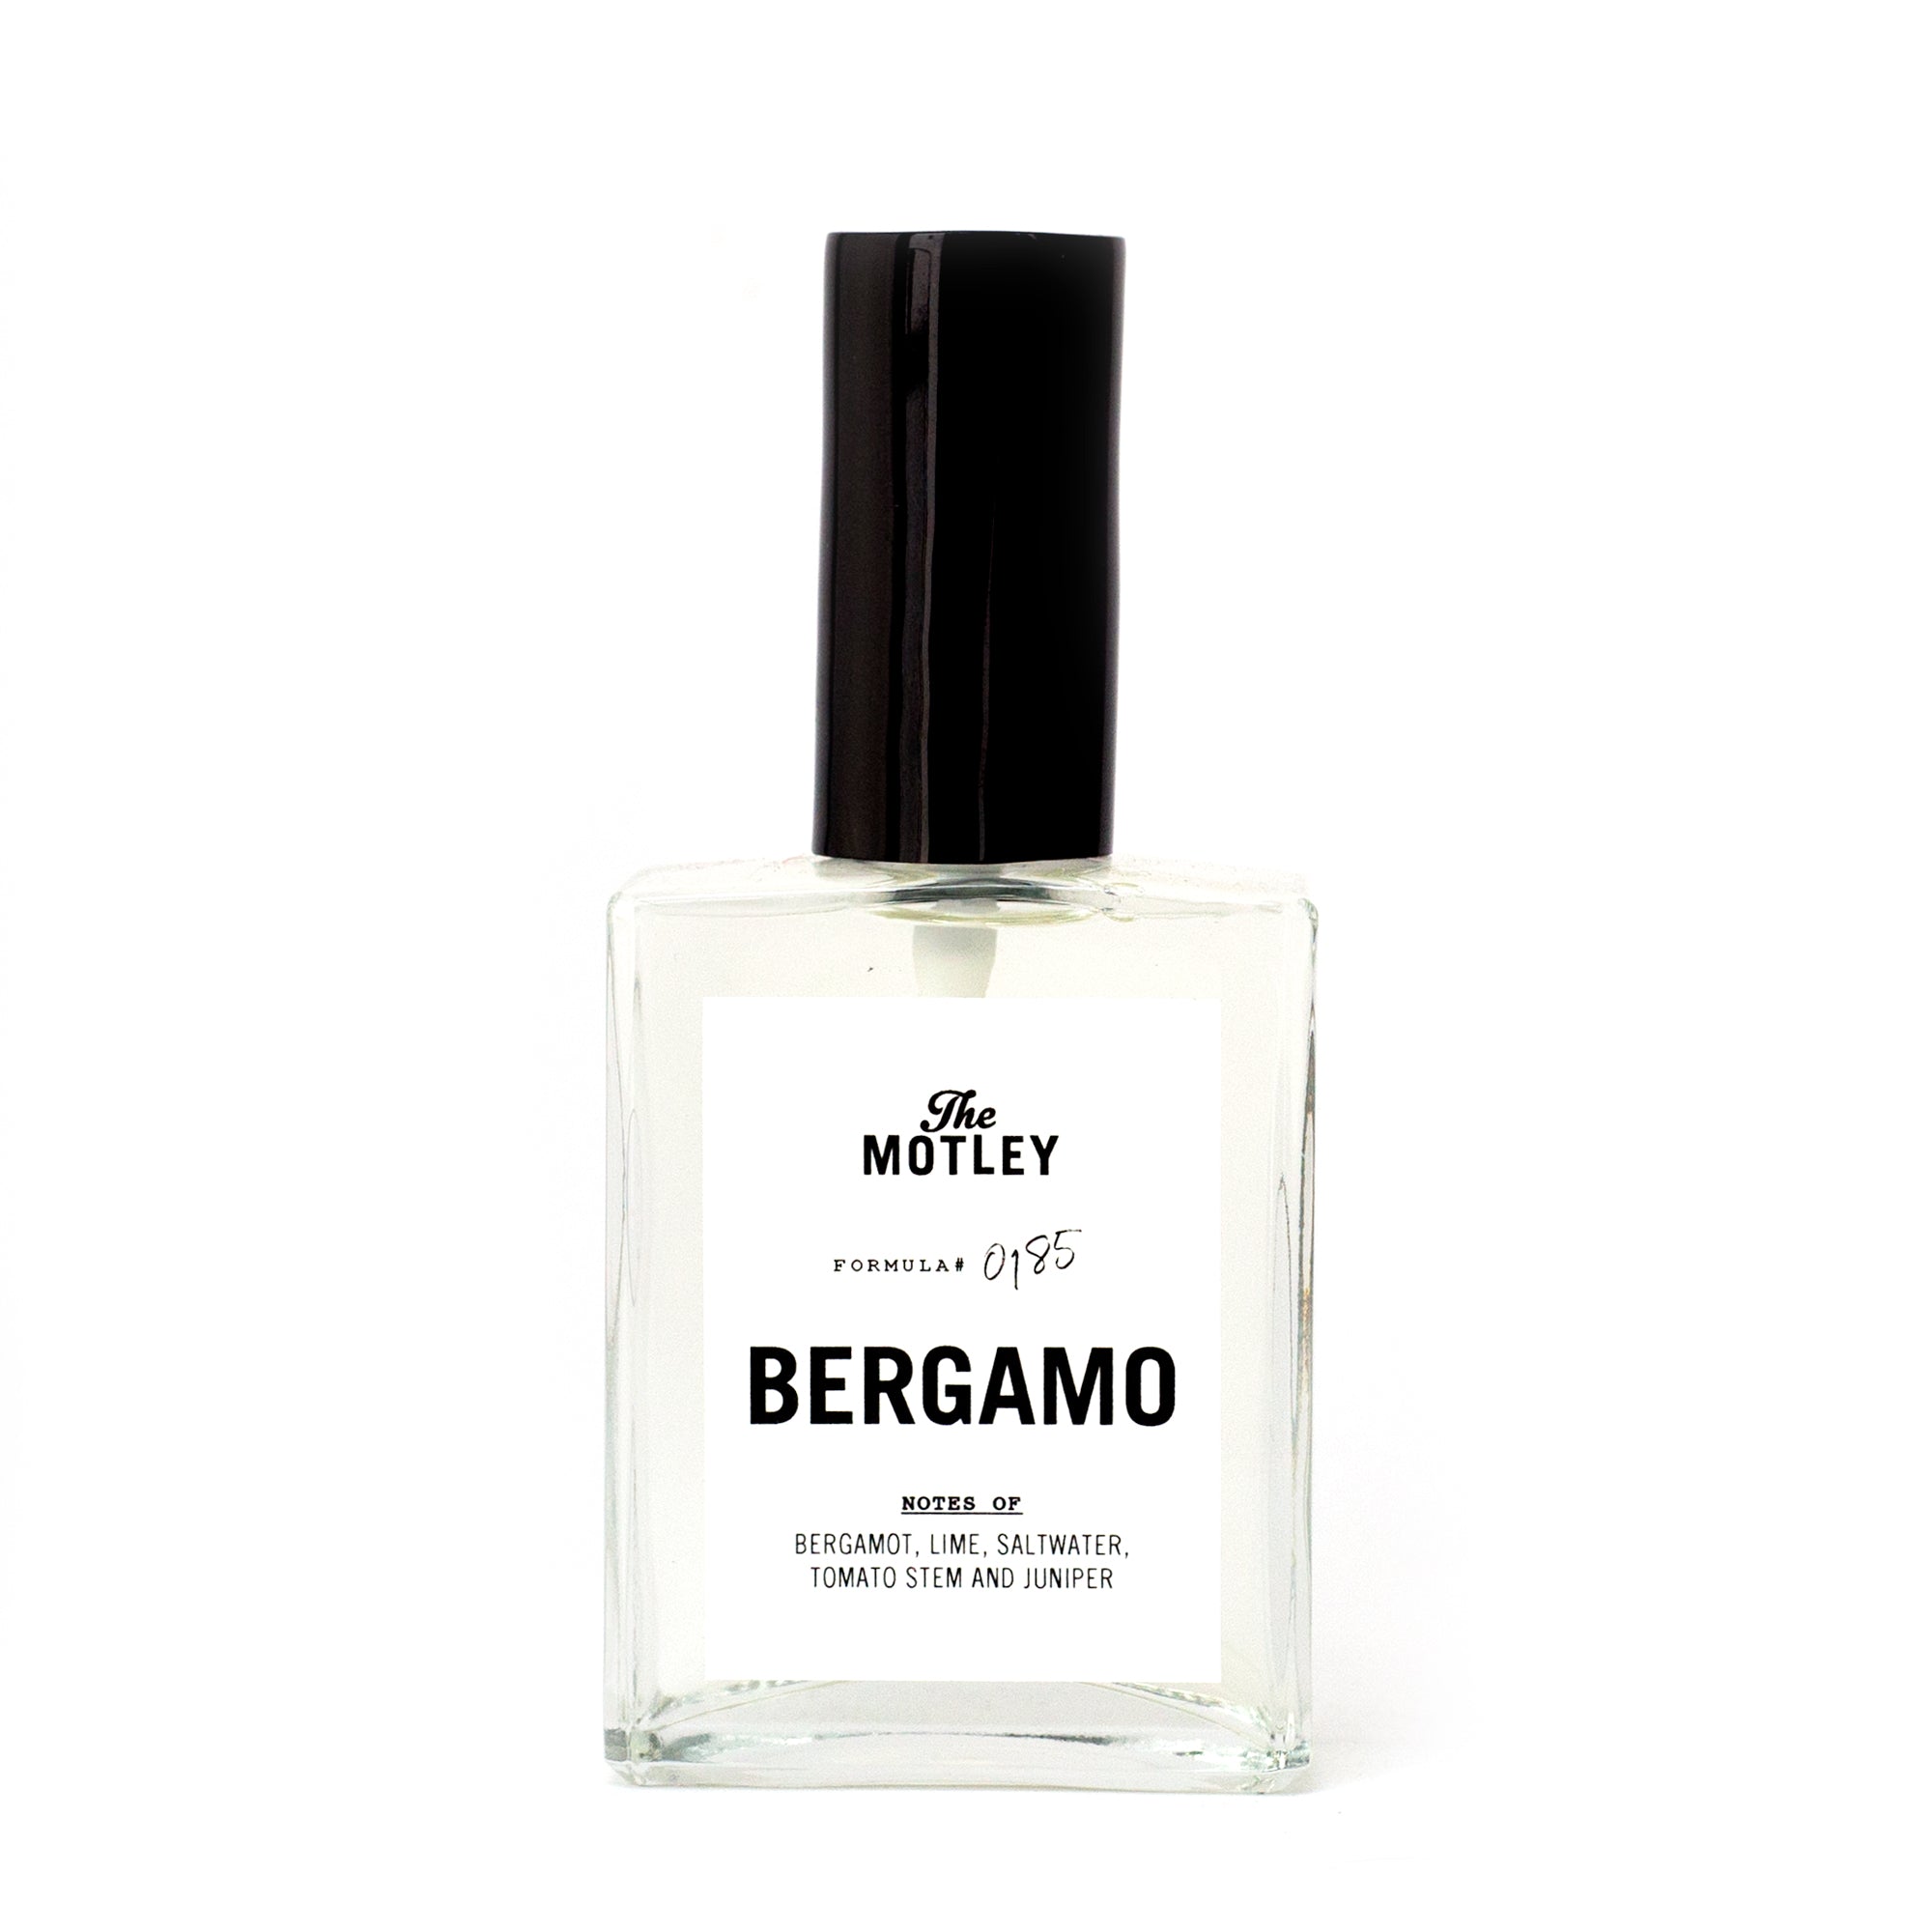 The Motley Bergamo Fragrance in a glass bottle with clear liquid and a black pump cap against a white background